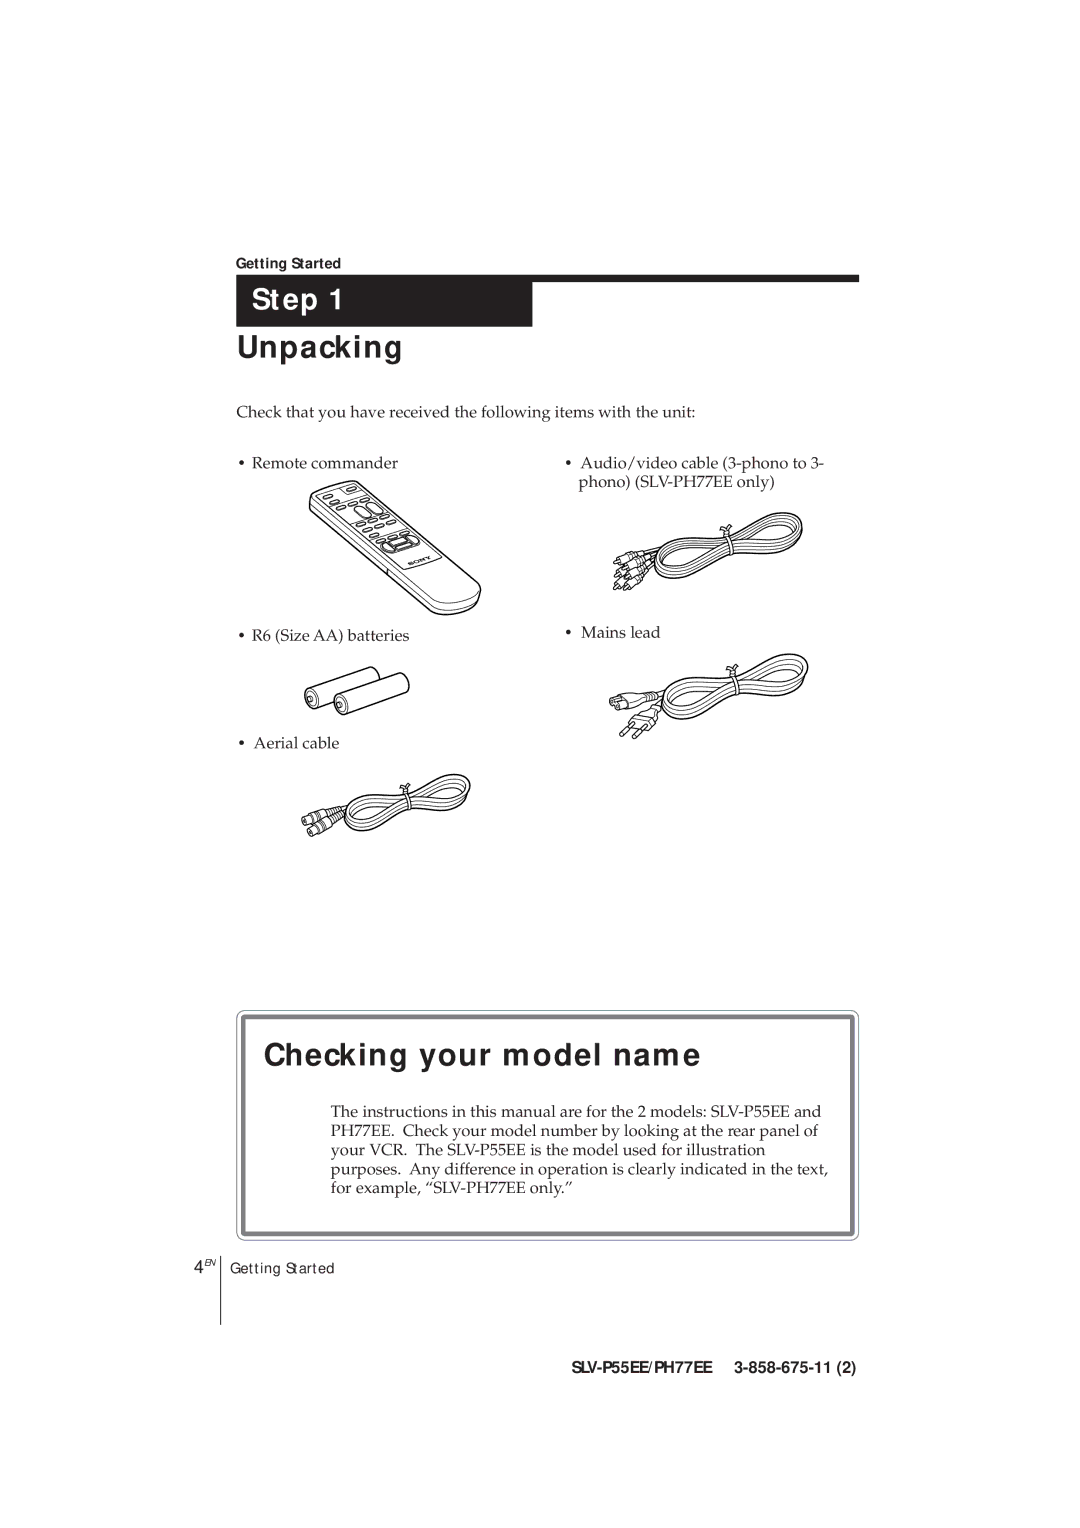 Sony SLV-P55EE, SLV-PH77EE operating instructions Unpacking, Checking your model name, Getting Started 